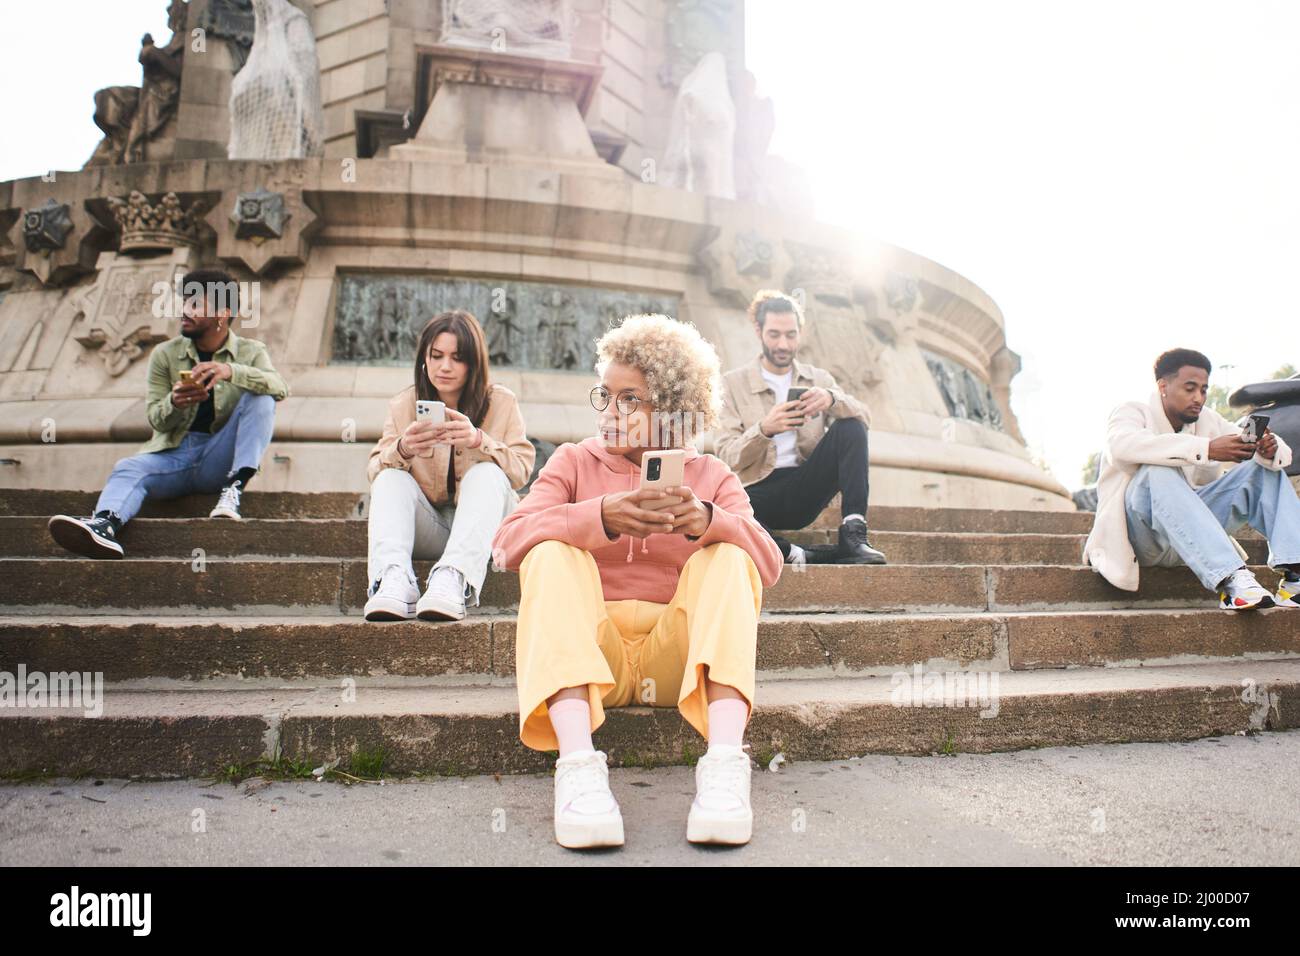 Group of people using phone with serious face. Friends focused on their mobiles sitting on a staircase in a city and a woman looks to the side Stock Photo